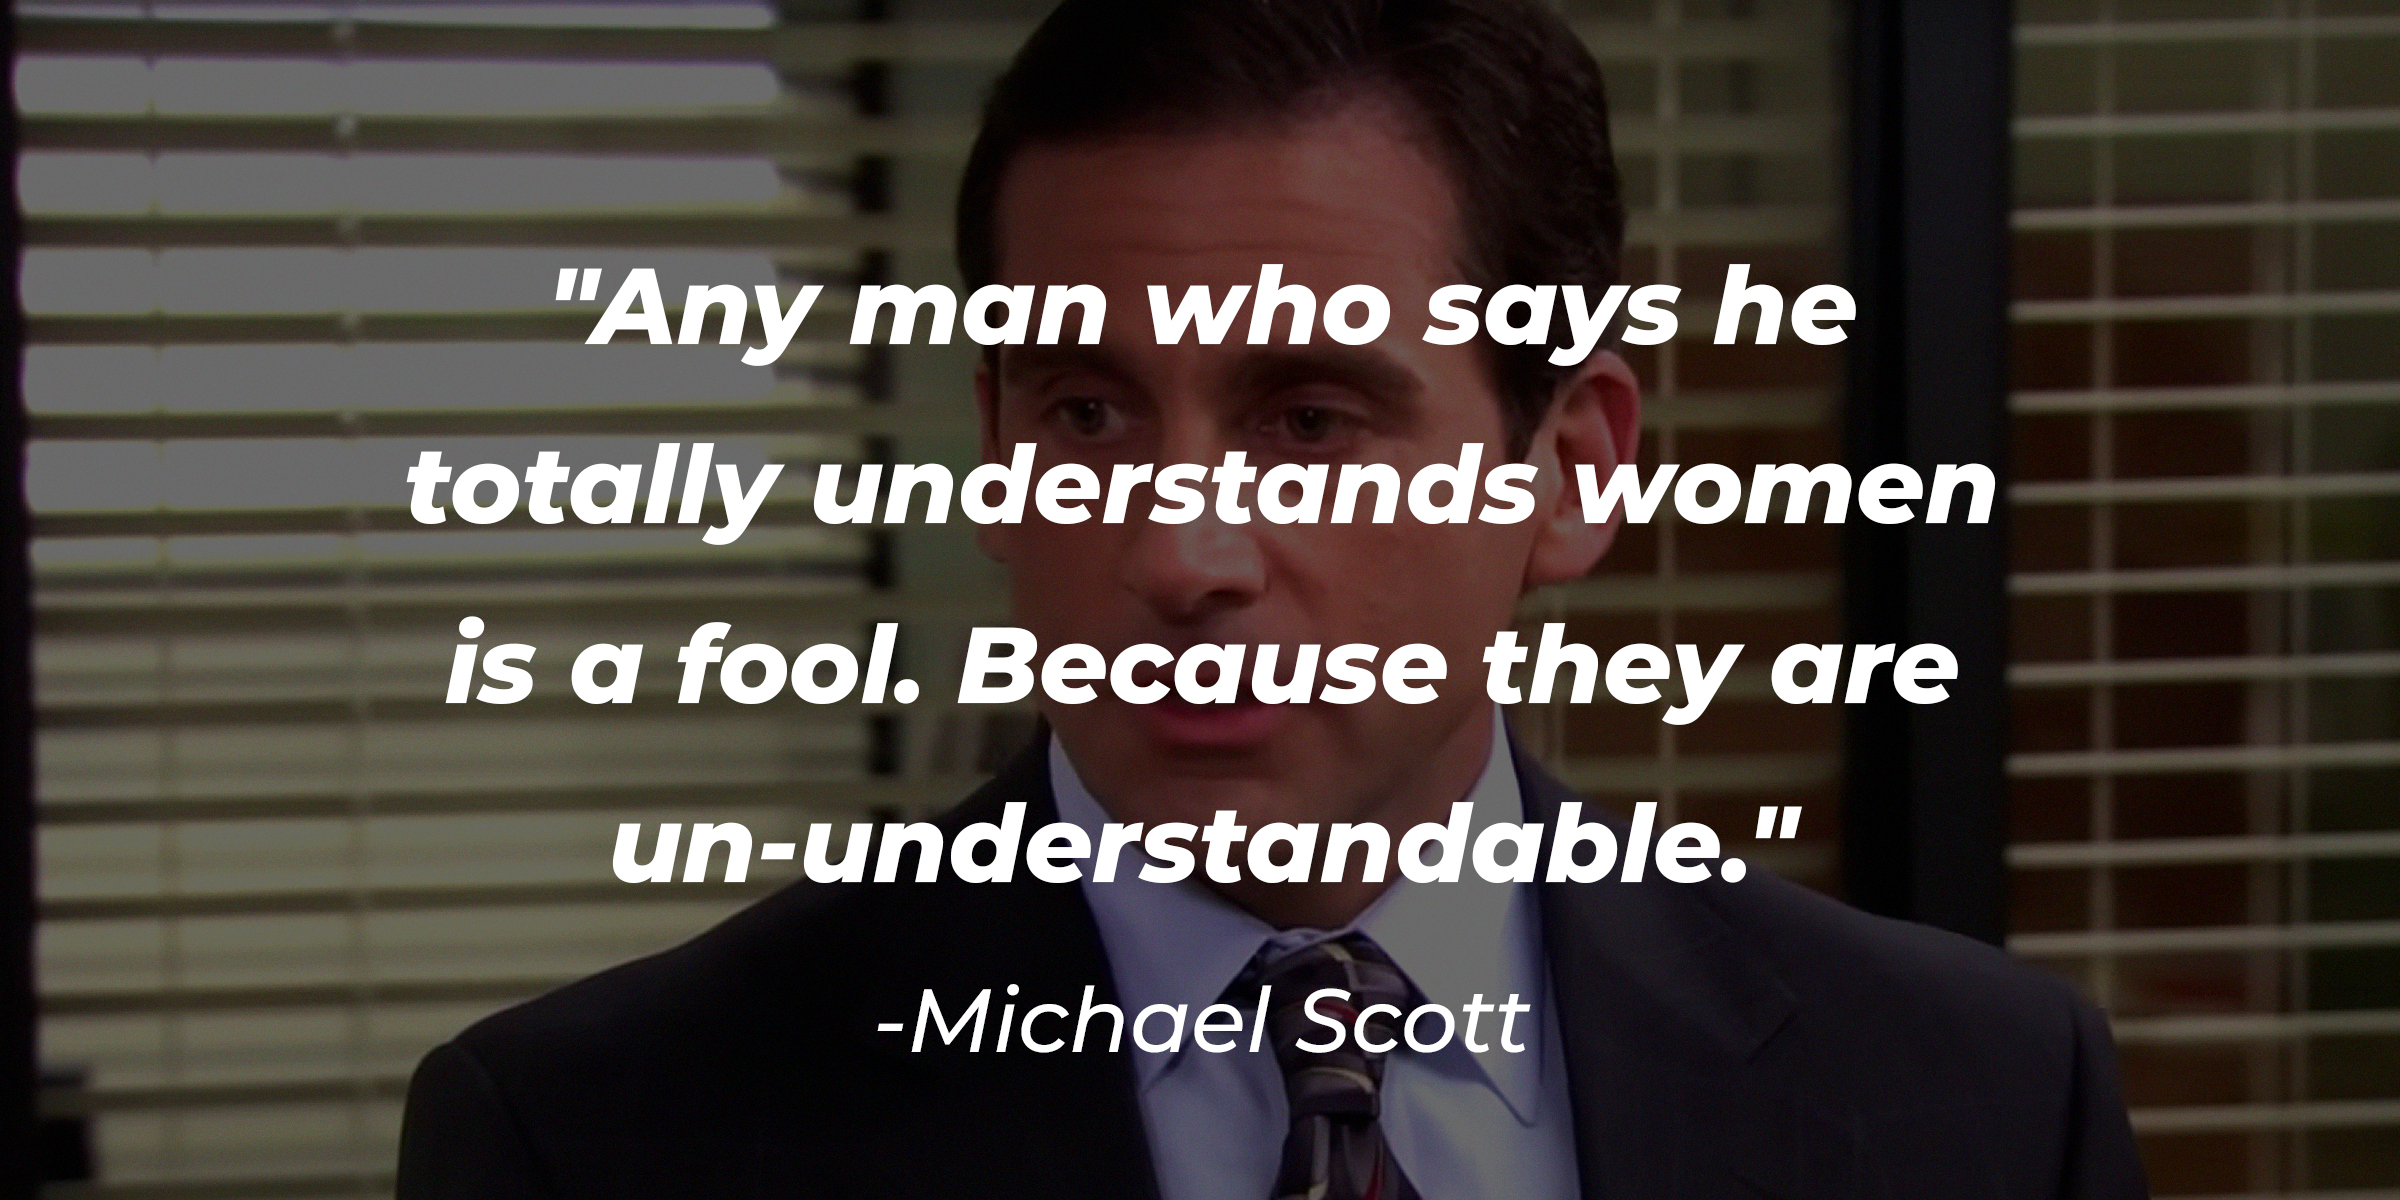 Michael Scott's Quote: "Any man who says he understands women is a fool. Because women are un-understandable" | Source: YouTube/TheOffice